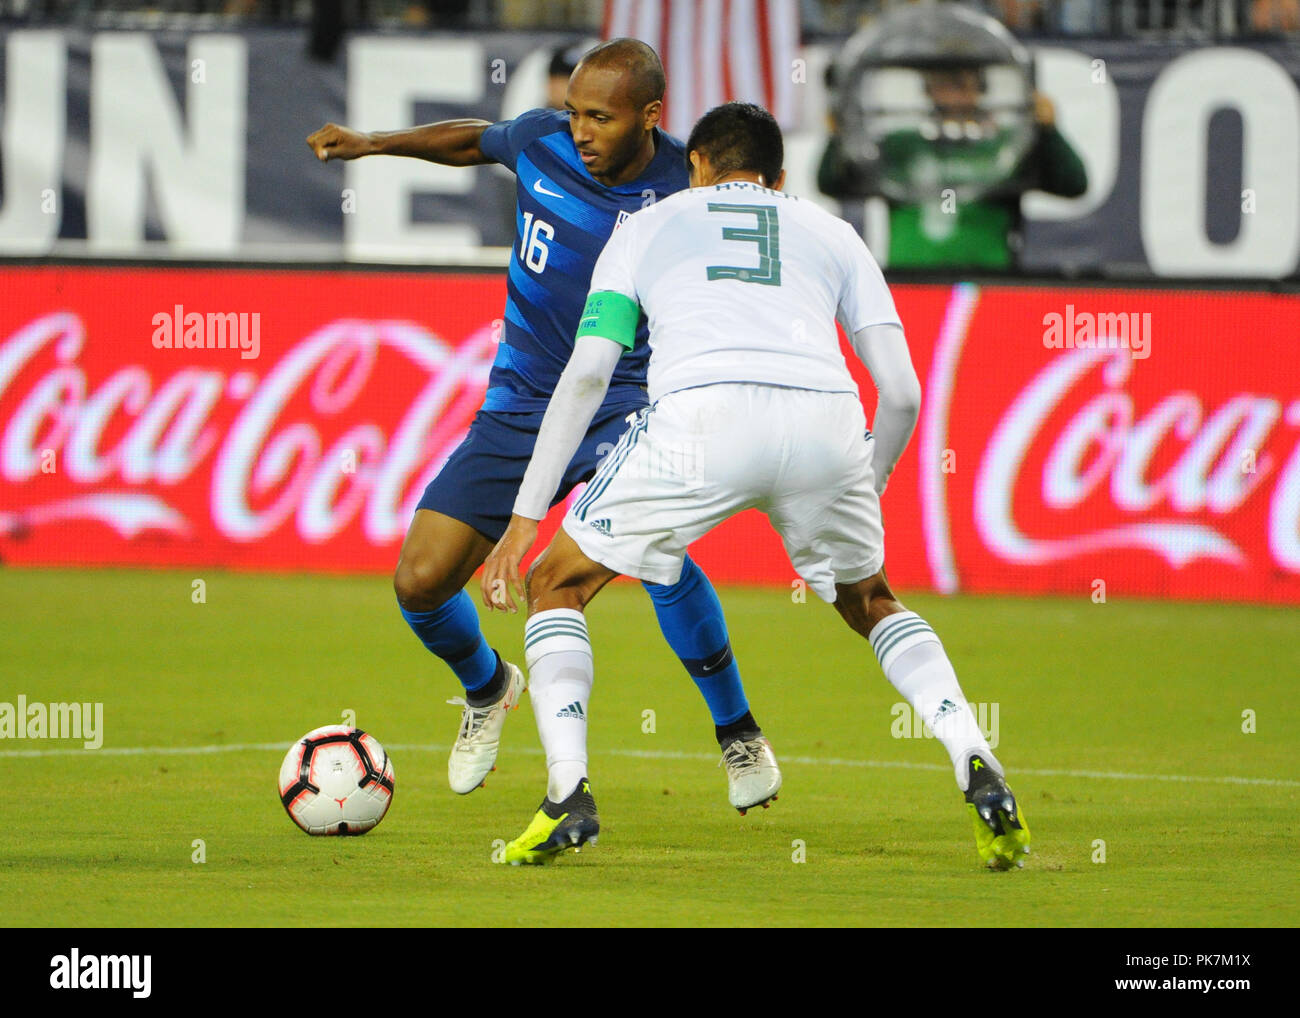 Nashville, TN, USA. 11th Sep, 2018. US midfielder, Julian Green (16), tries to get the ball past Mexico defenseman, Hugo Ayala (3), during the International Friendly match between Mexico and USA at Nissan Stadium in Nashville, TN. The US National team defeated Mexico, 1-0. Kevin Langley/CSM/Alamy Live News Stock Photo